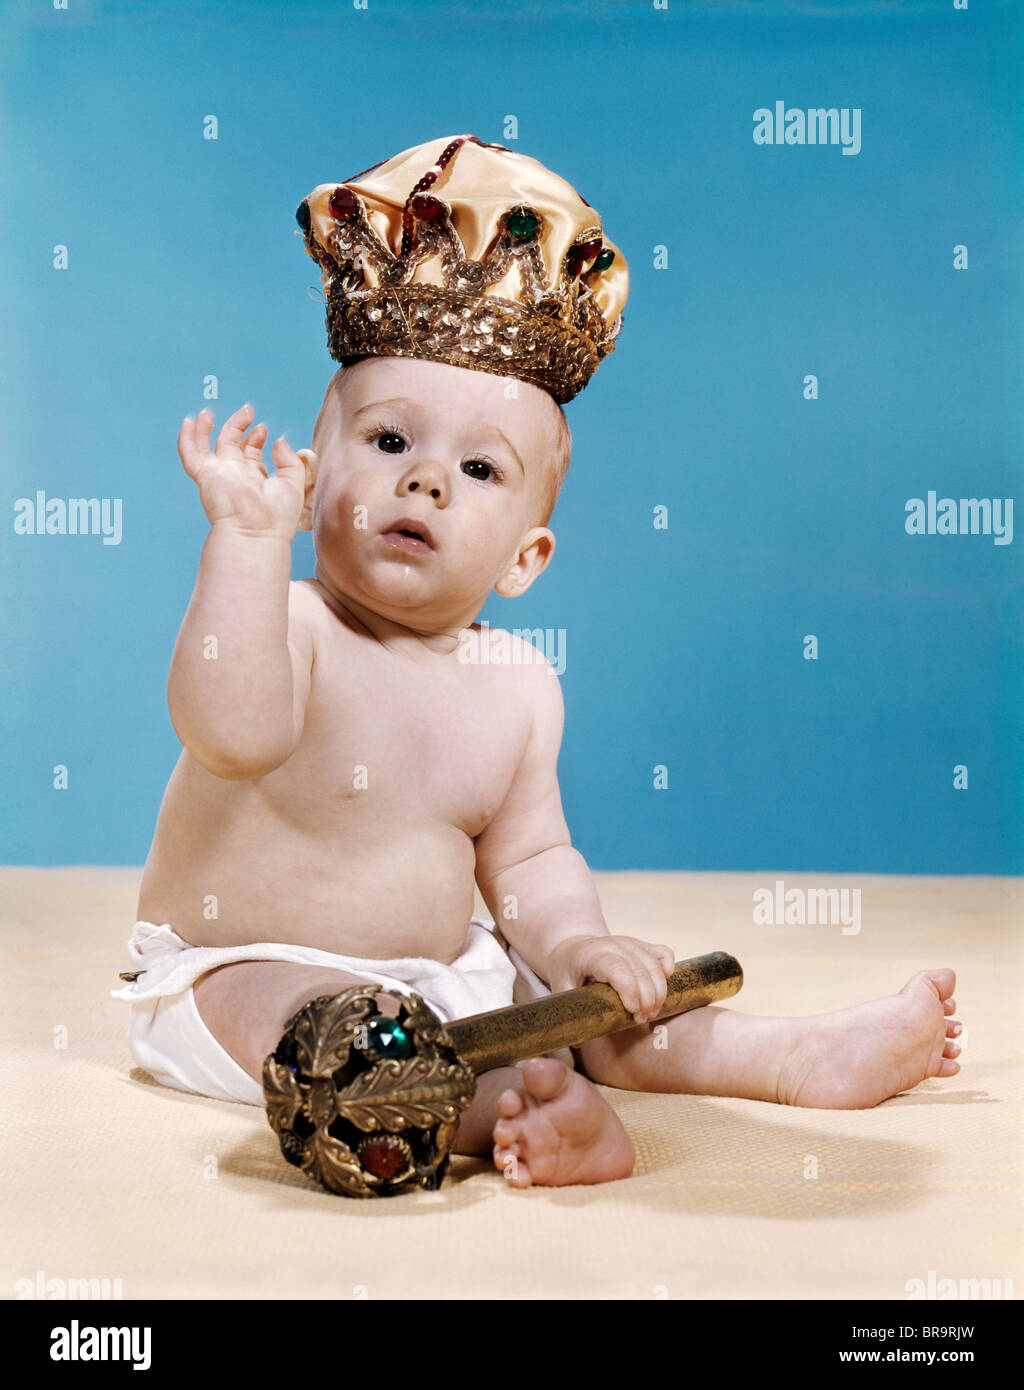 1960s BABY WEARING CLOTH DIAPER AND CROWN HOLDING A SCEPTER WAVING WITH ONE ARM RAISED LOOKING AT CAMERA Stock Photo